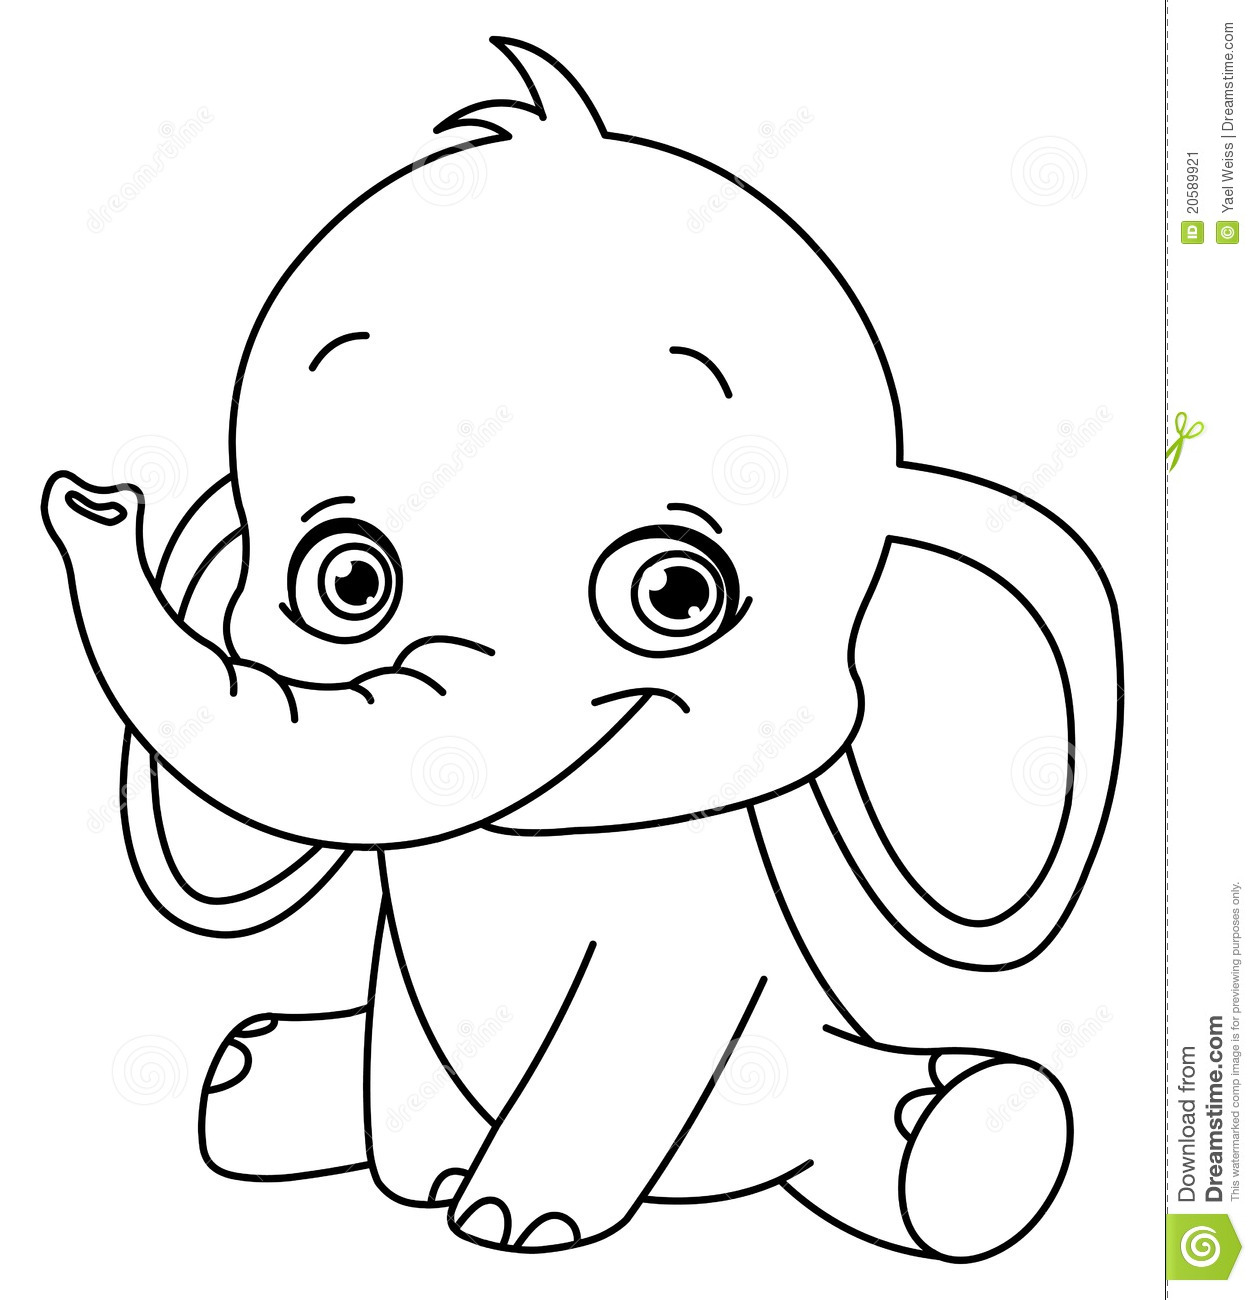 Baby elephant coloring pages to download and print for free